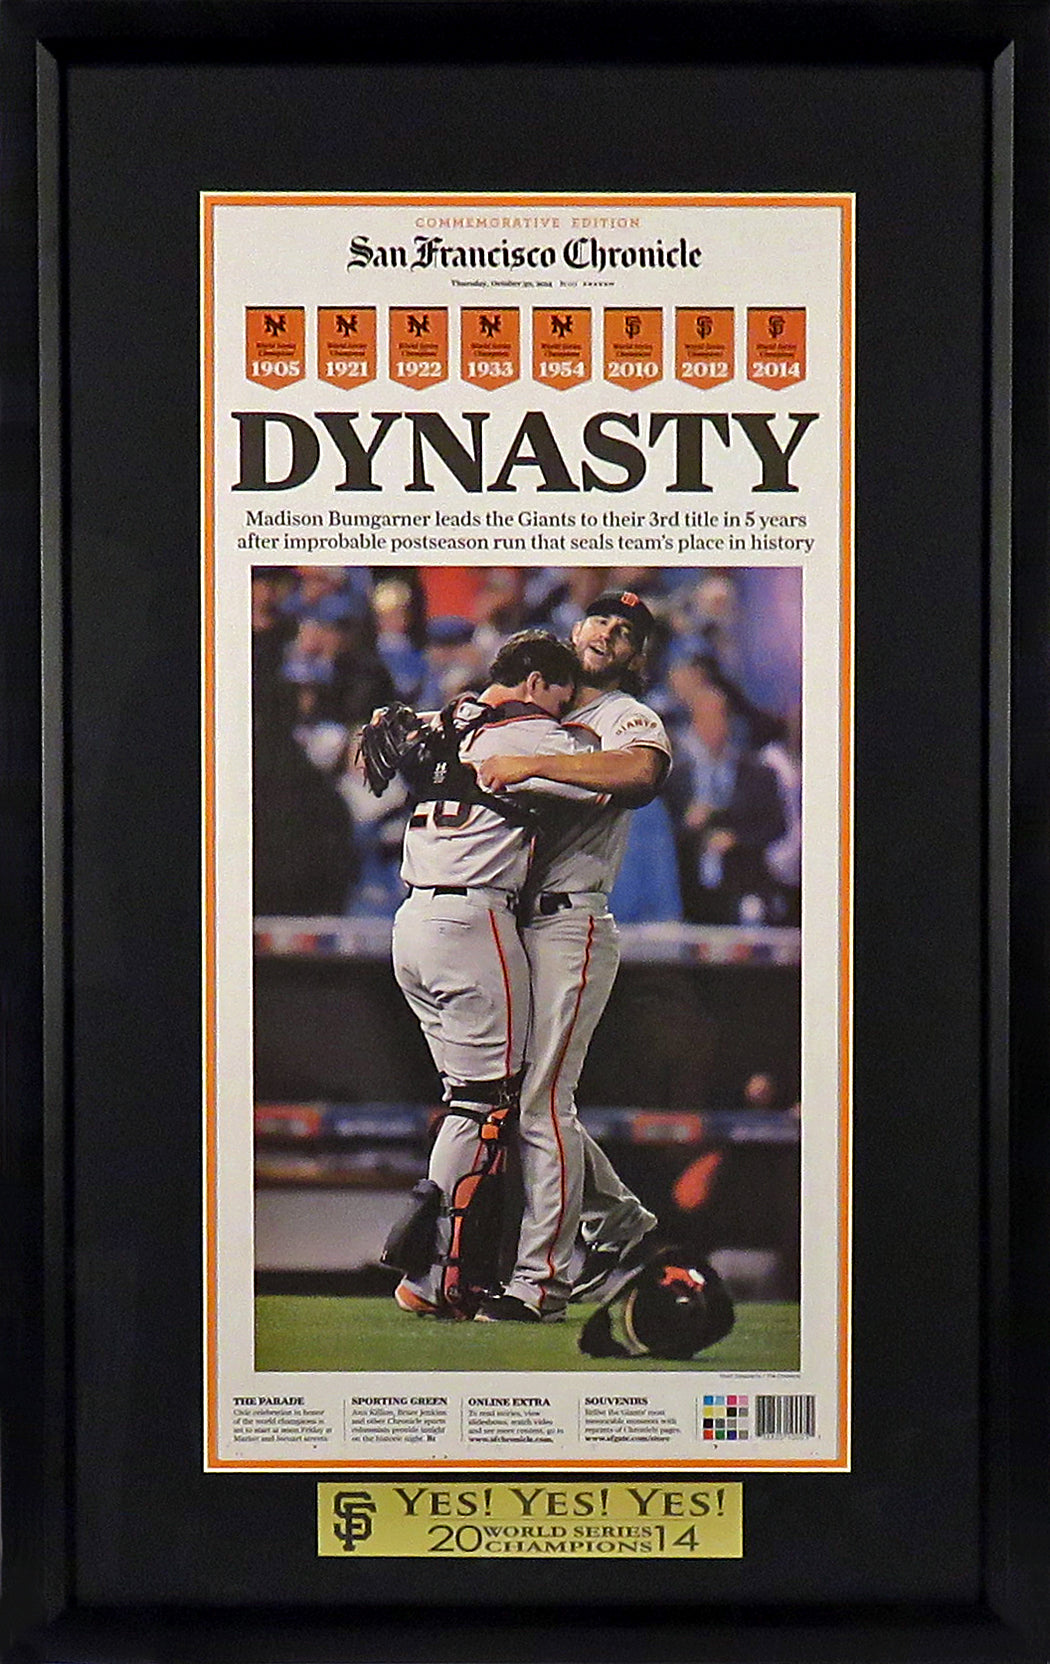 Official san Francisco Giants 2010 2012 2014 world series champs